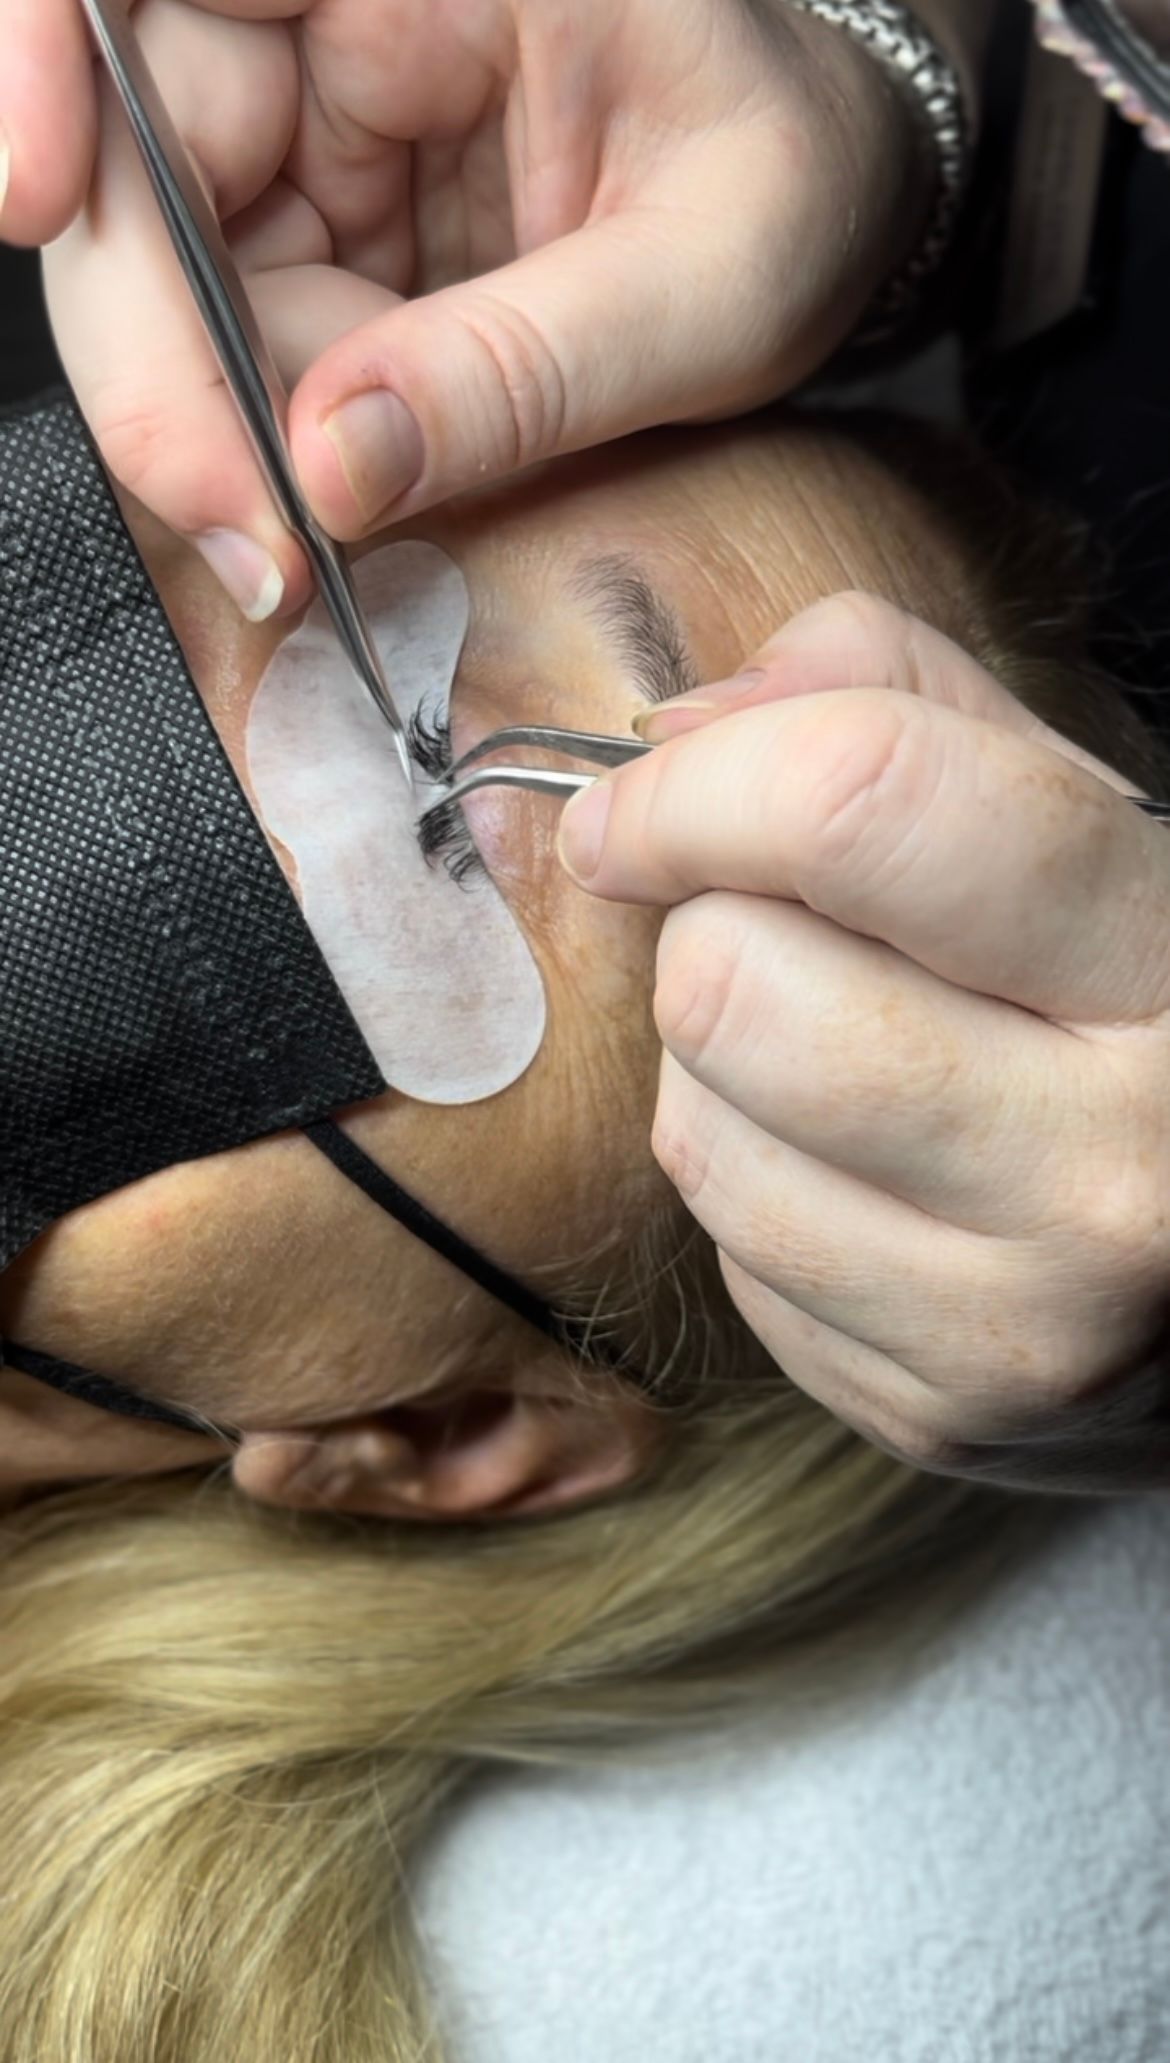 A person is applying eyelash extensions to a woman 's eye.